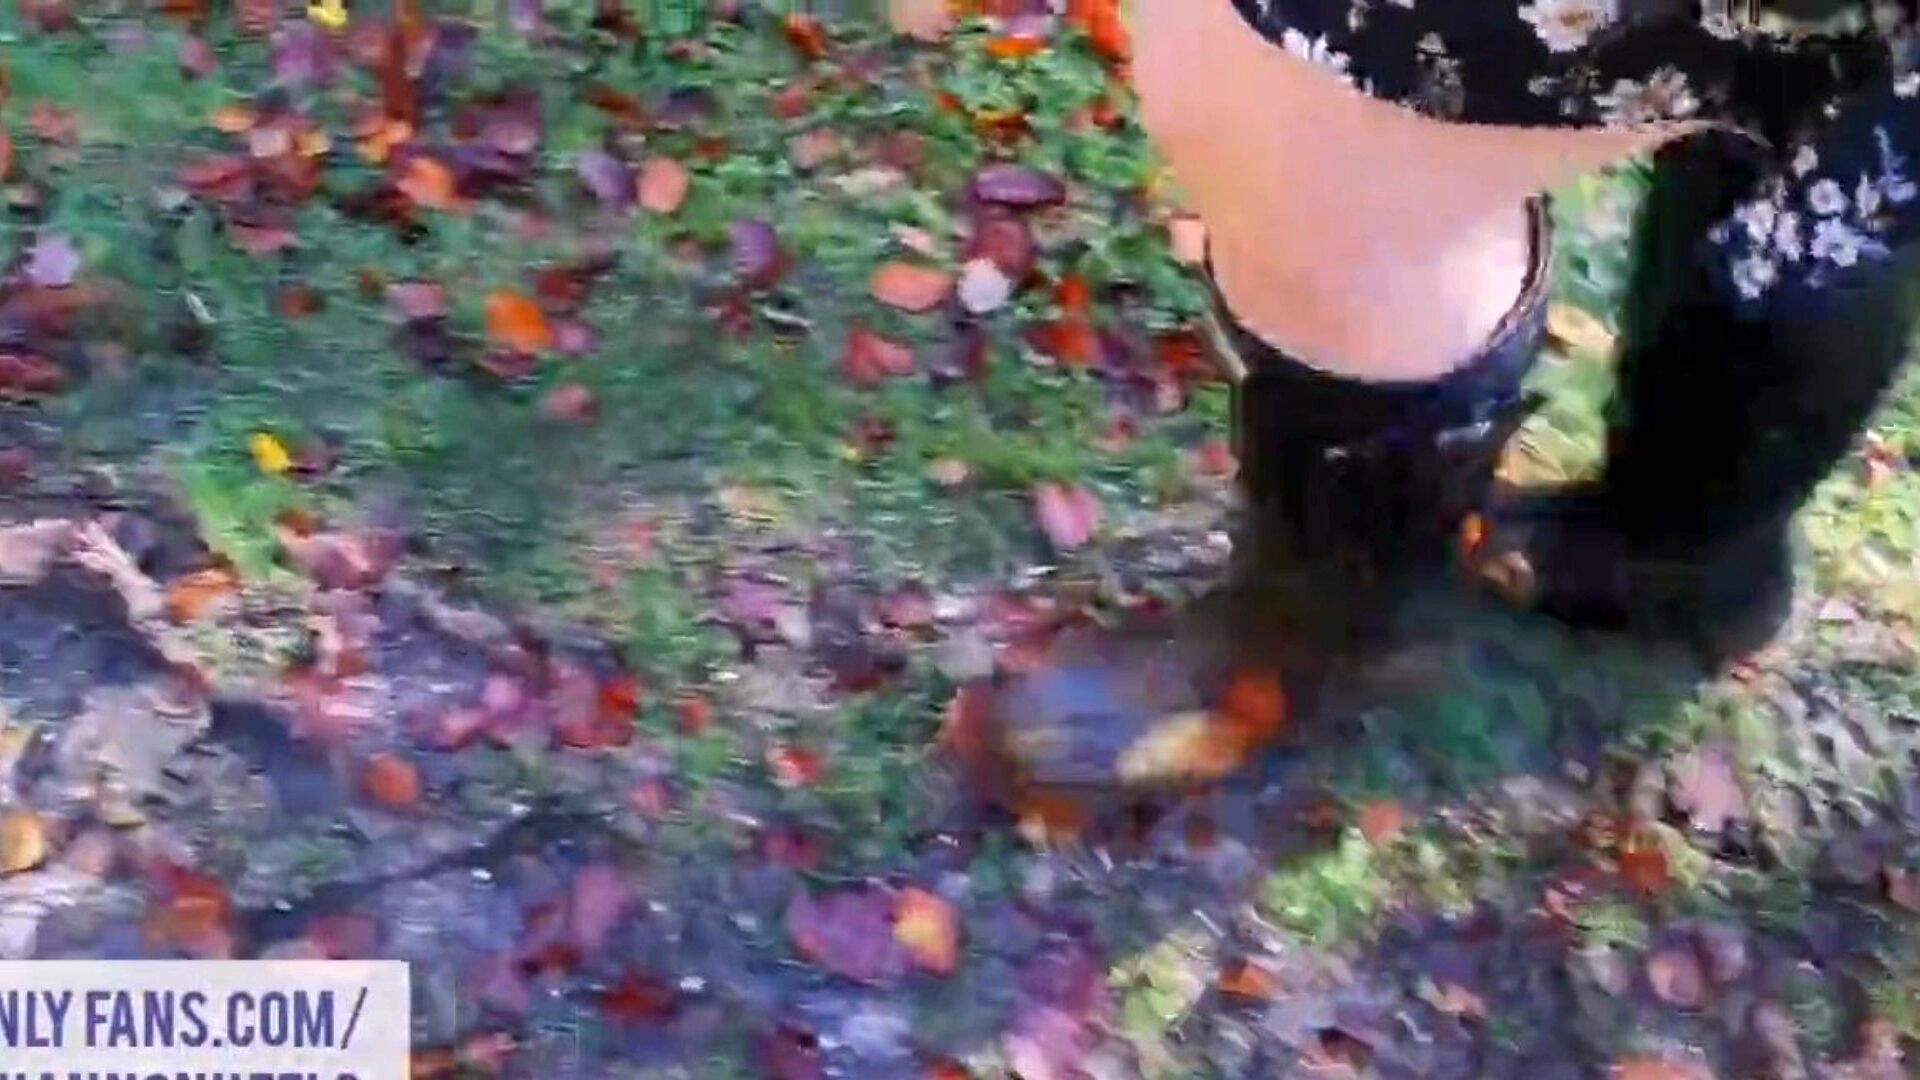 Flashing and Pissing in the Forest - Shannon Heels I enjoy taking ambles in the forest and showing off my curves and vagina Gets me so moist peeing and fingering myself, venturing somebody catching me. See me receive my wellies all oozy and smutty gonzo